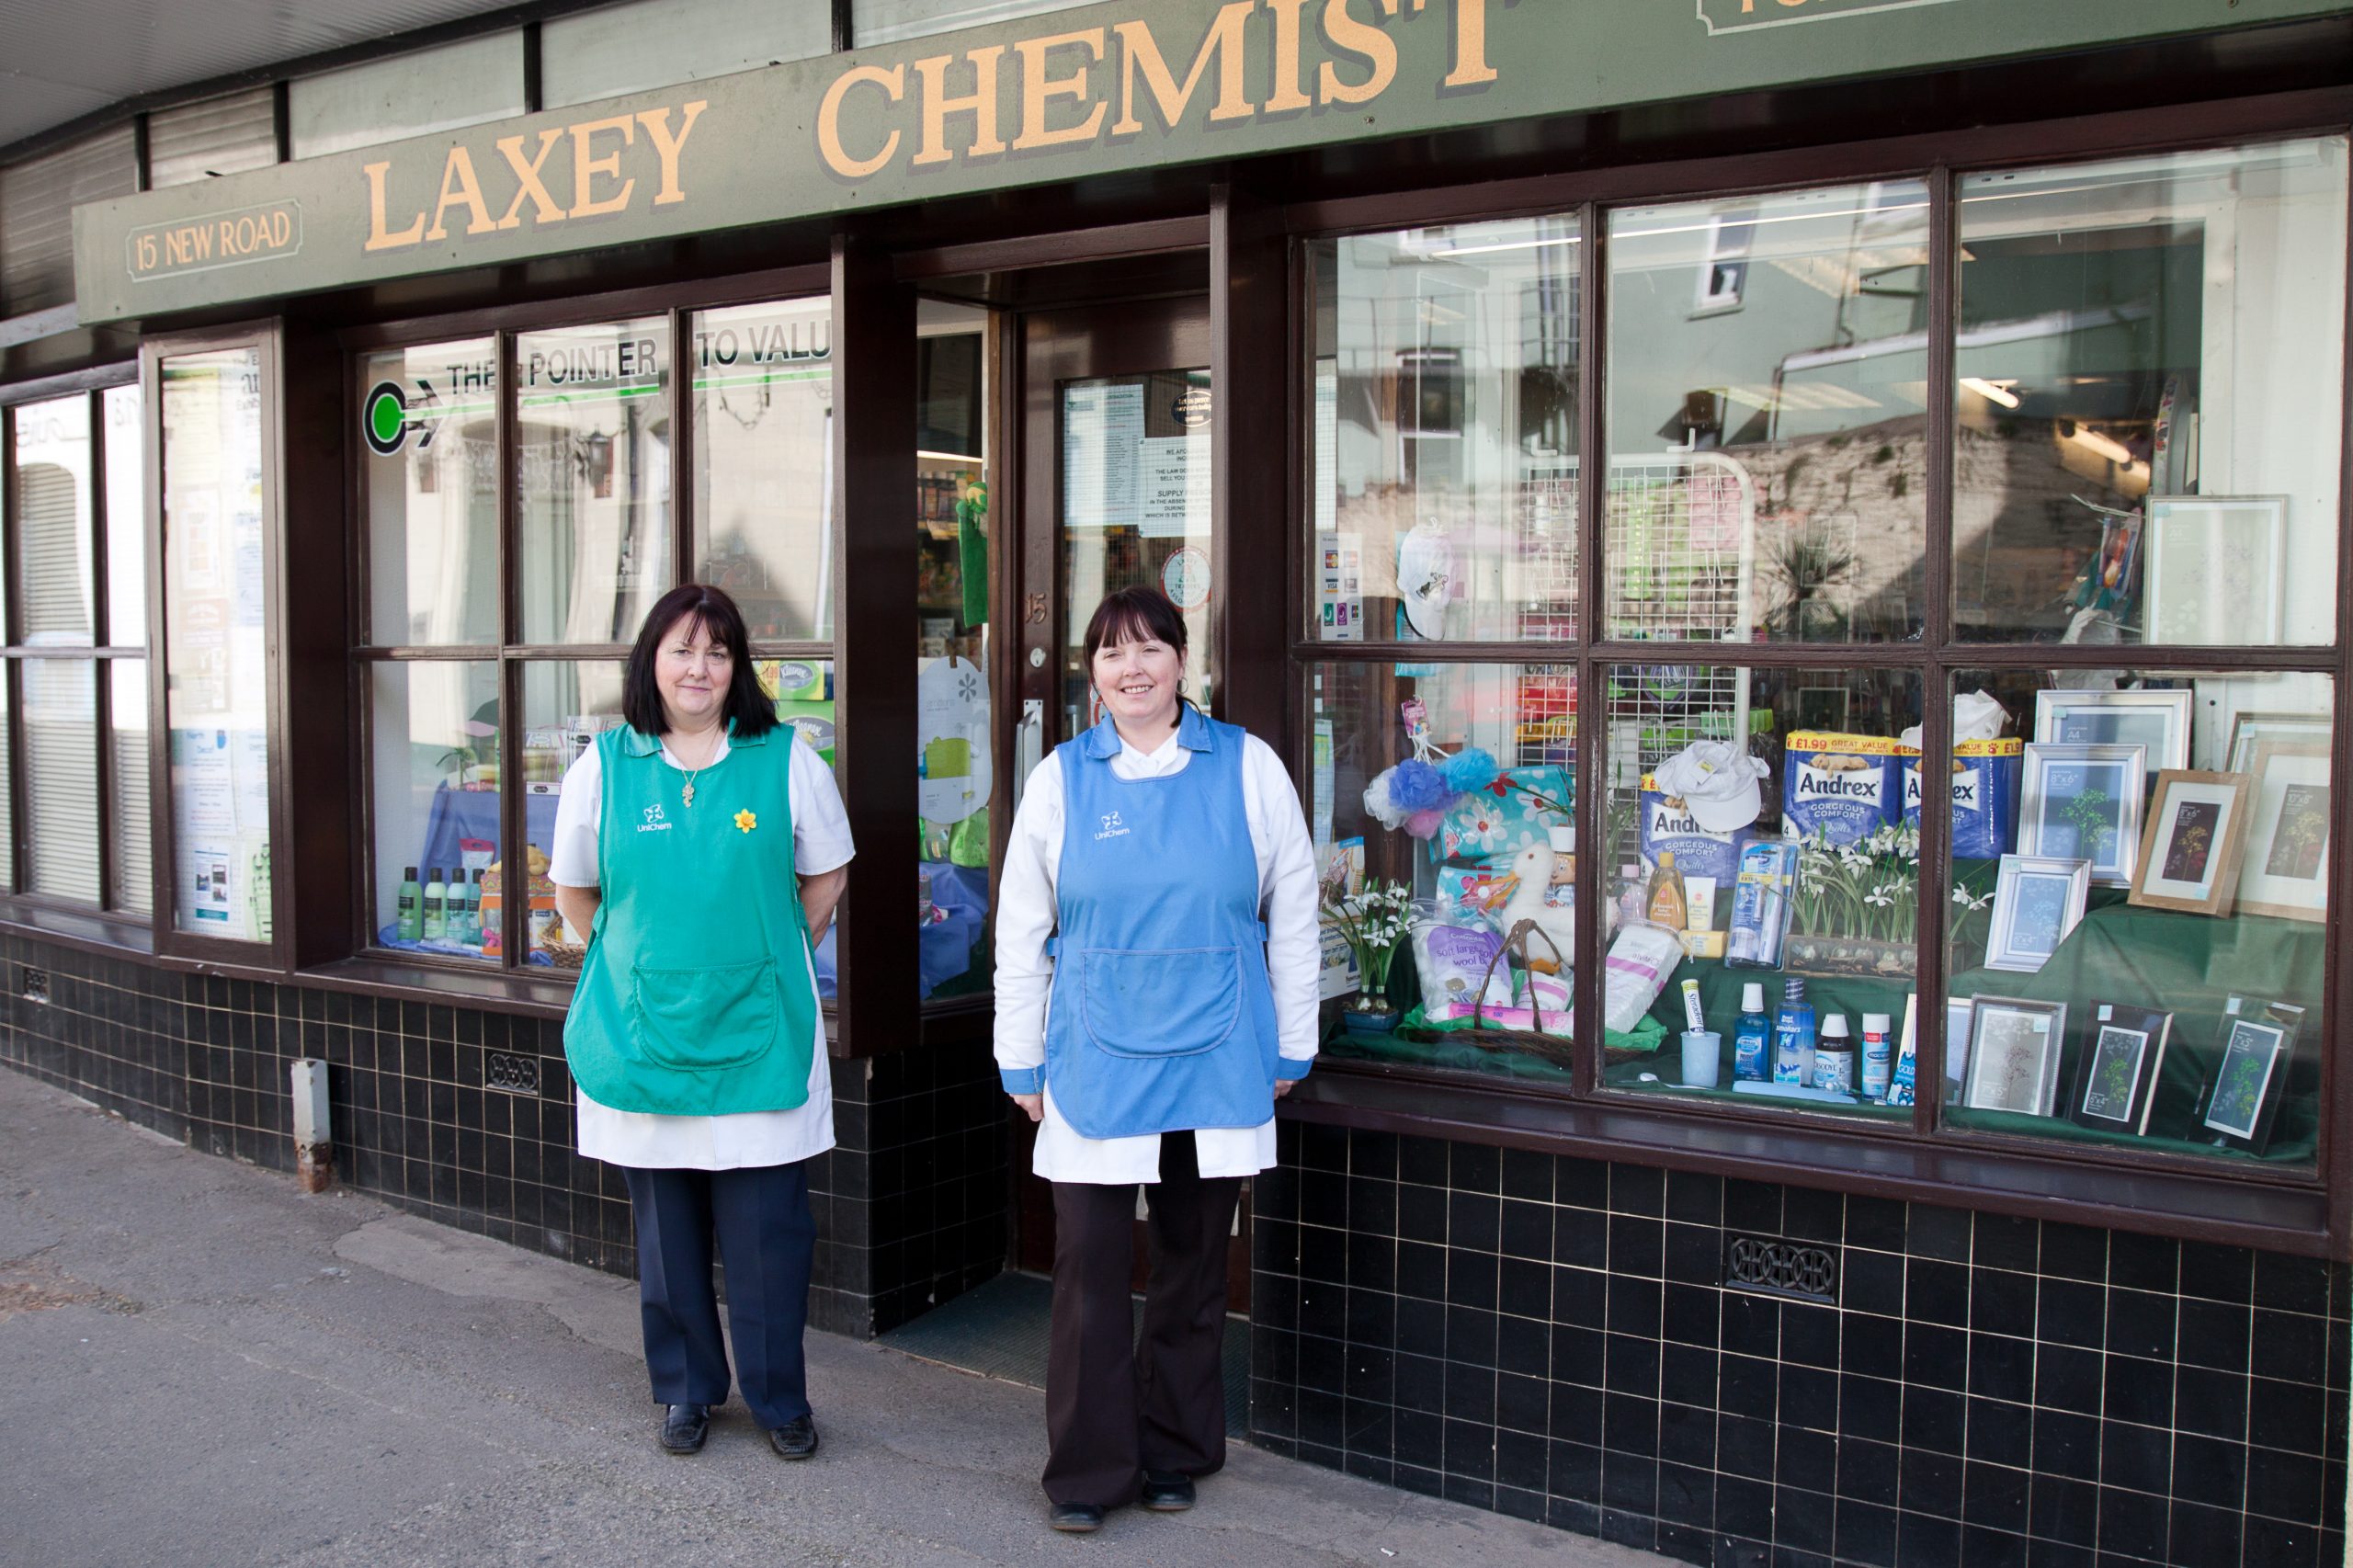 Laxey Chemist 15 New Road, Laxey IM4 7BD